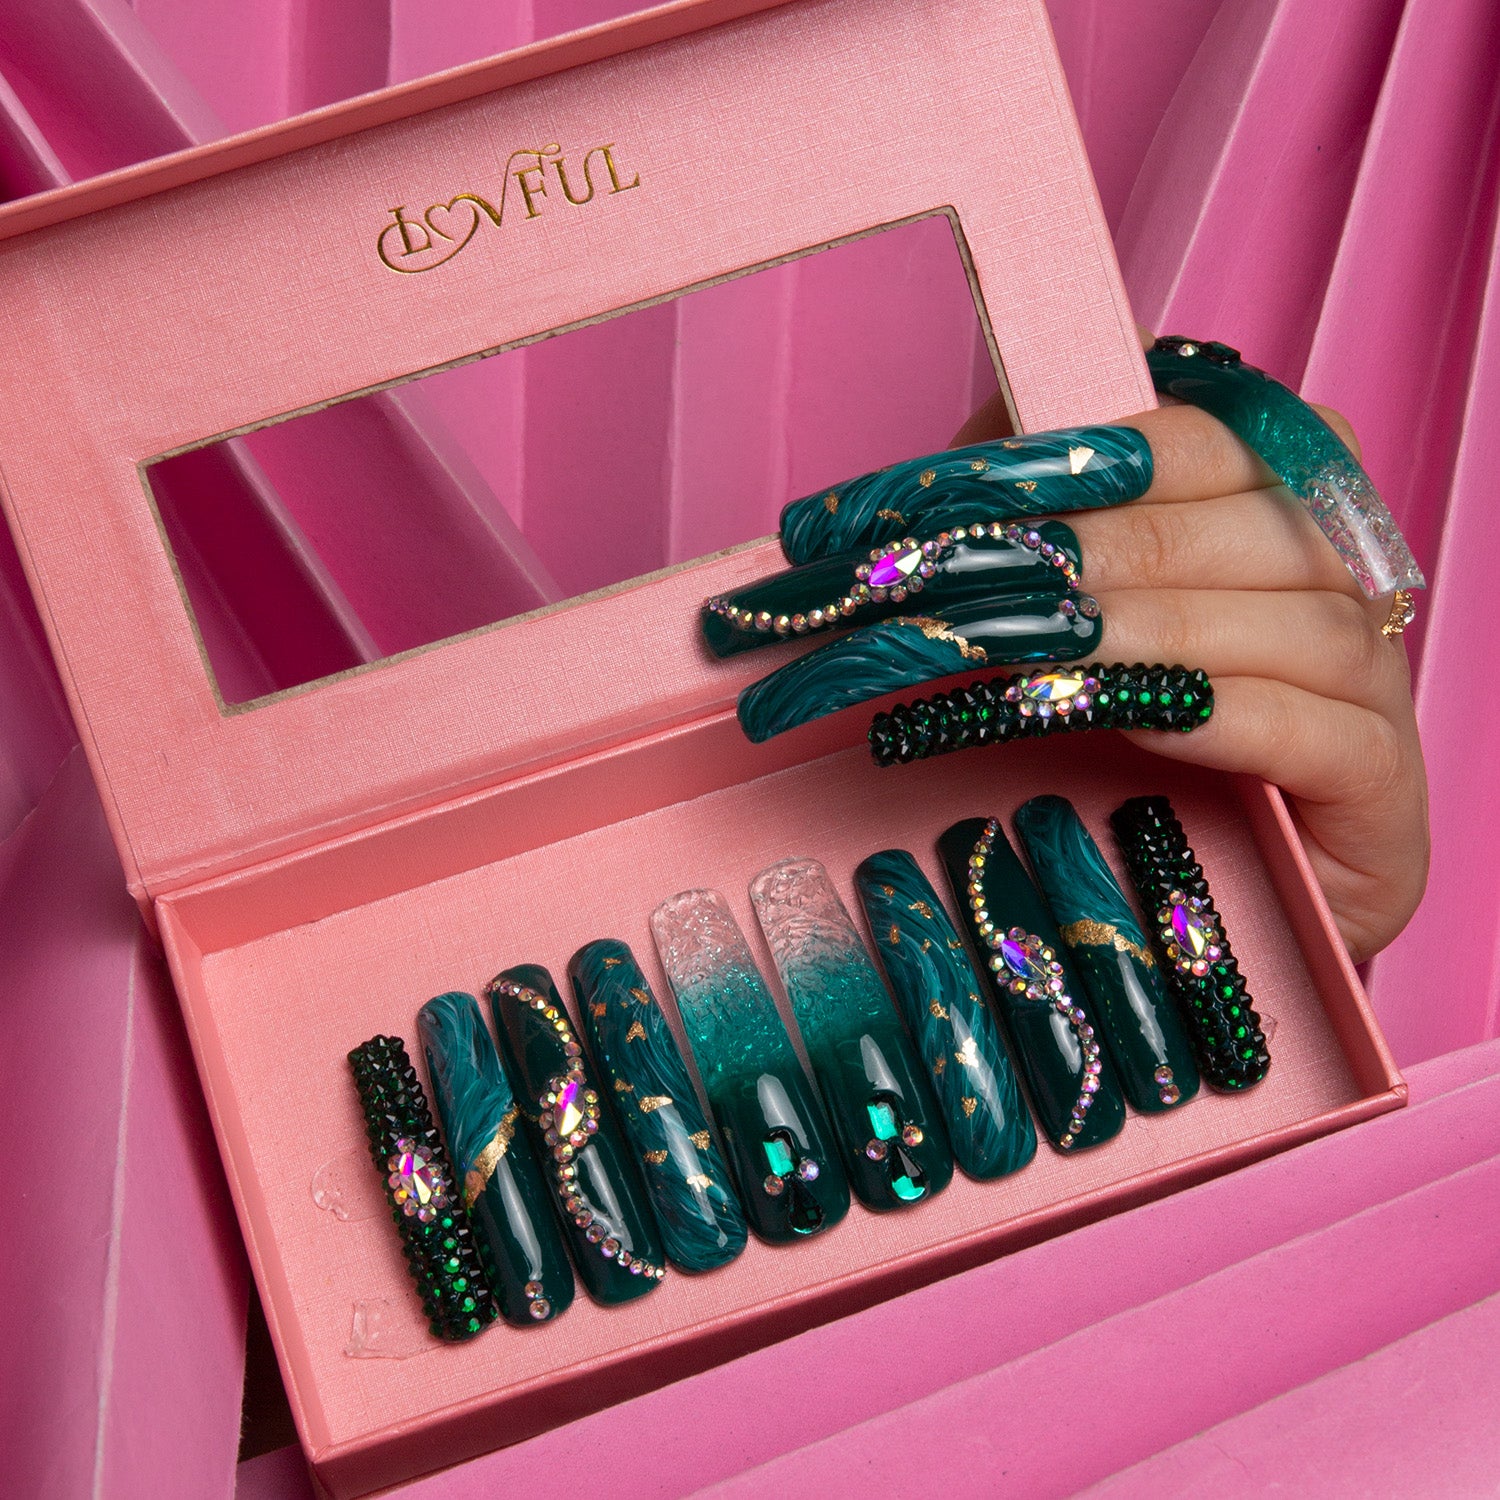 Emerald Envy Press-On Nails - Curve in an open pink Lovful box with a hand showing the nails. Green liquid flowing design with intricate gold and jeweled decor, resembling forest foliage.